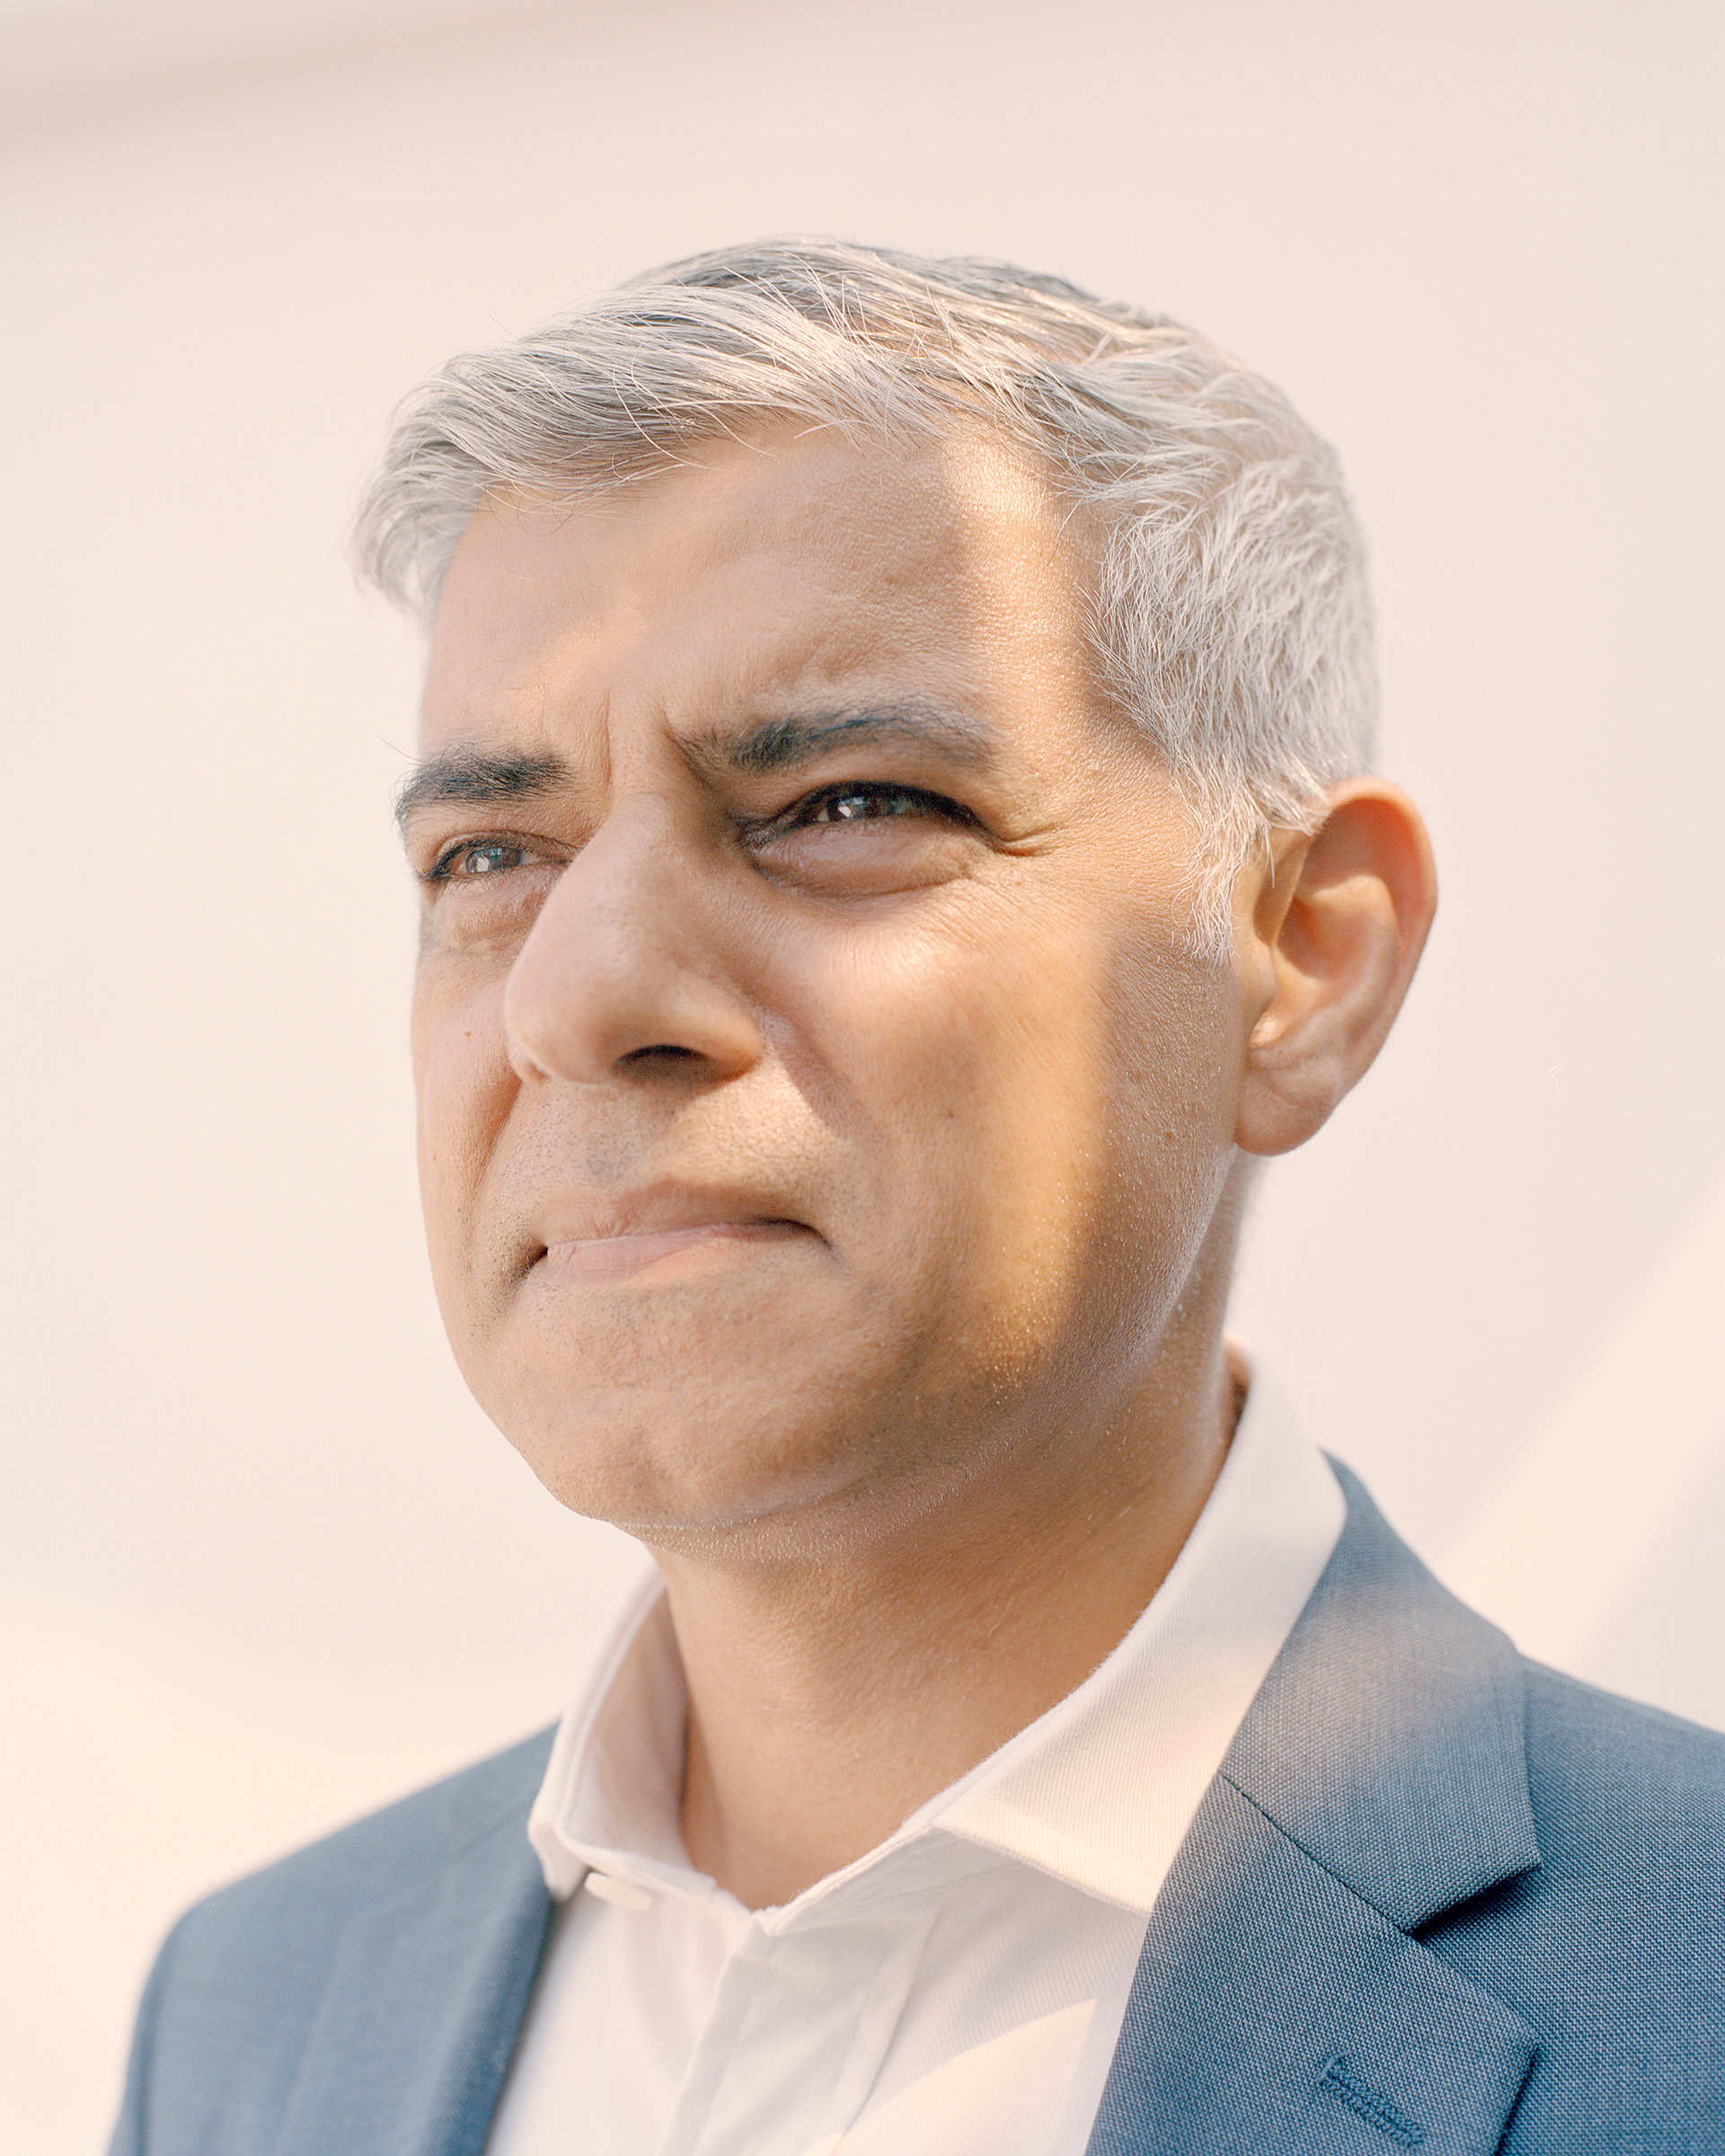 London Mayor Sadiq Khan, photographed at London's City Hall on July 21, 2021. (Cian Oba-Smith for TIME)